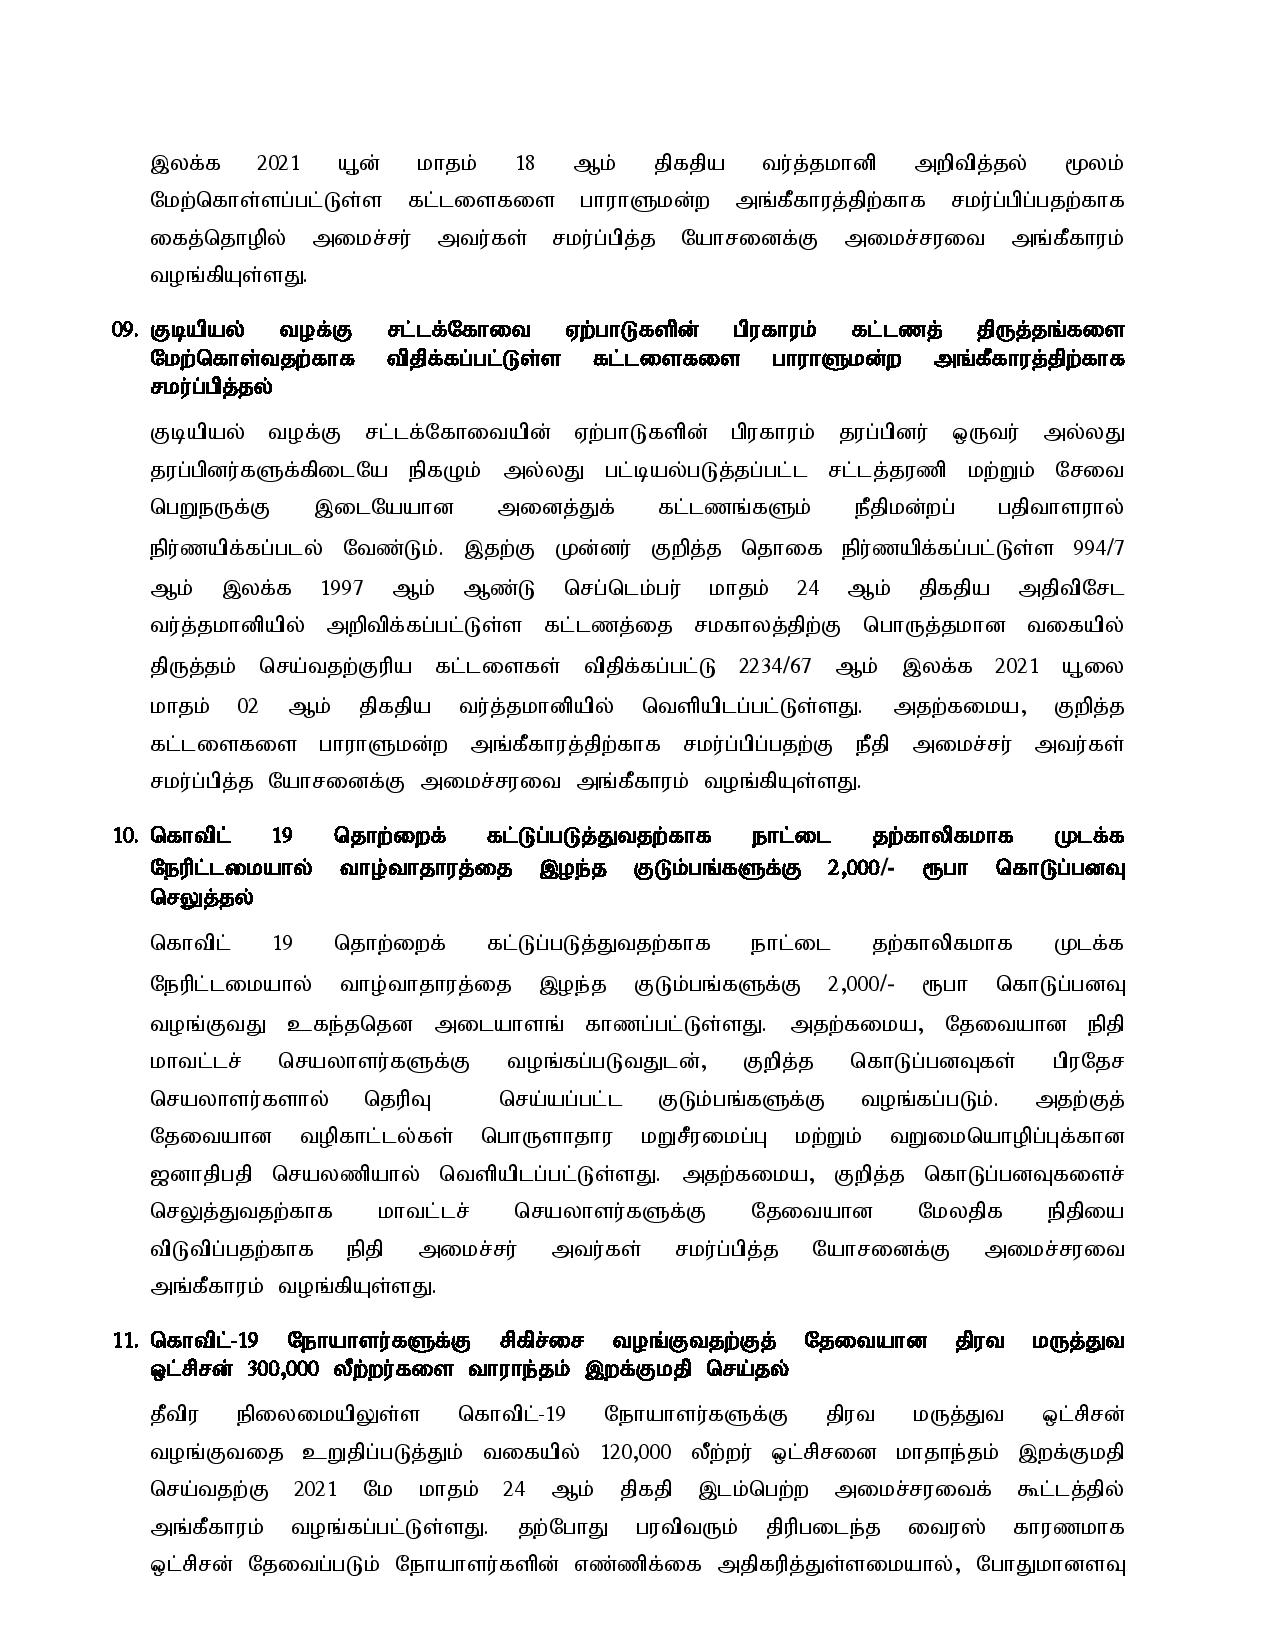 Canbinet Decision on 23.08.2021 Tamil page 005